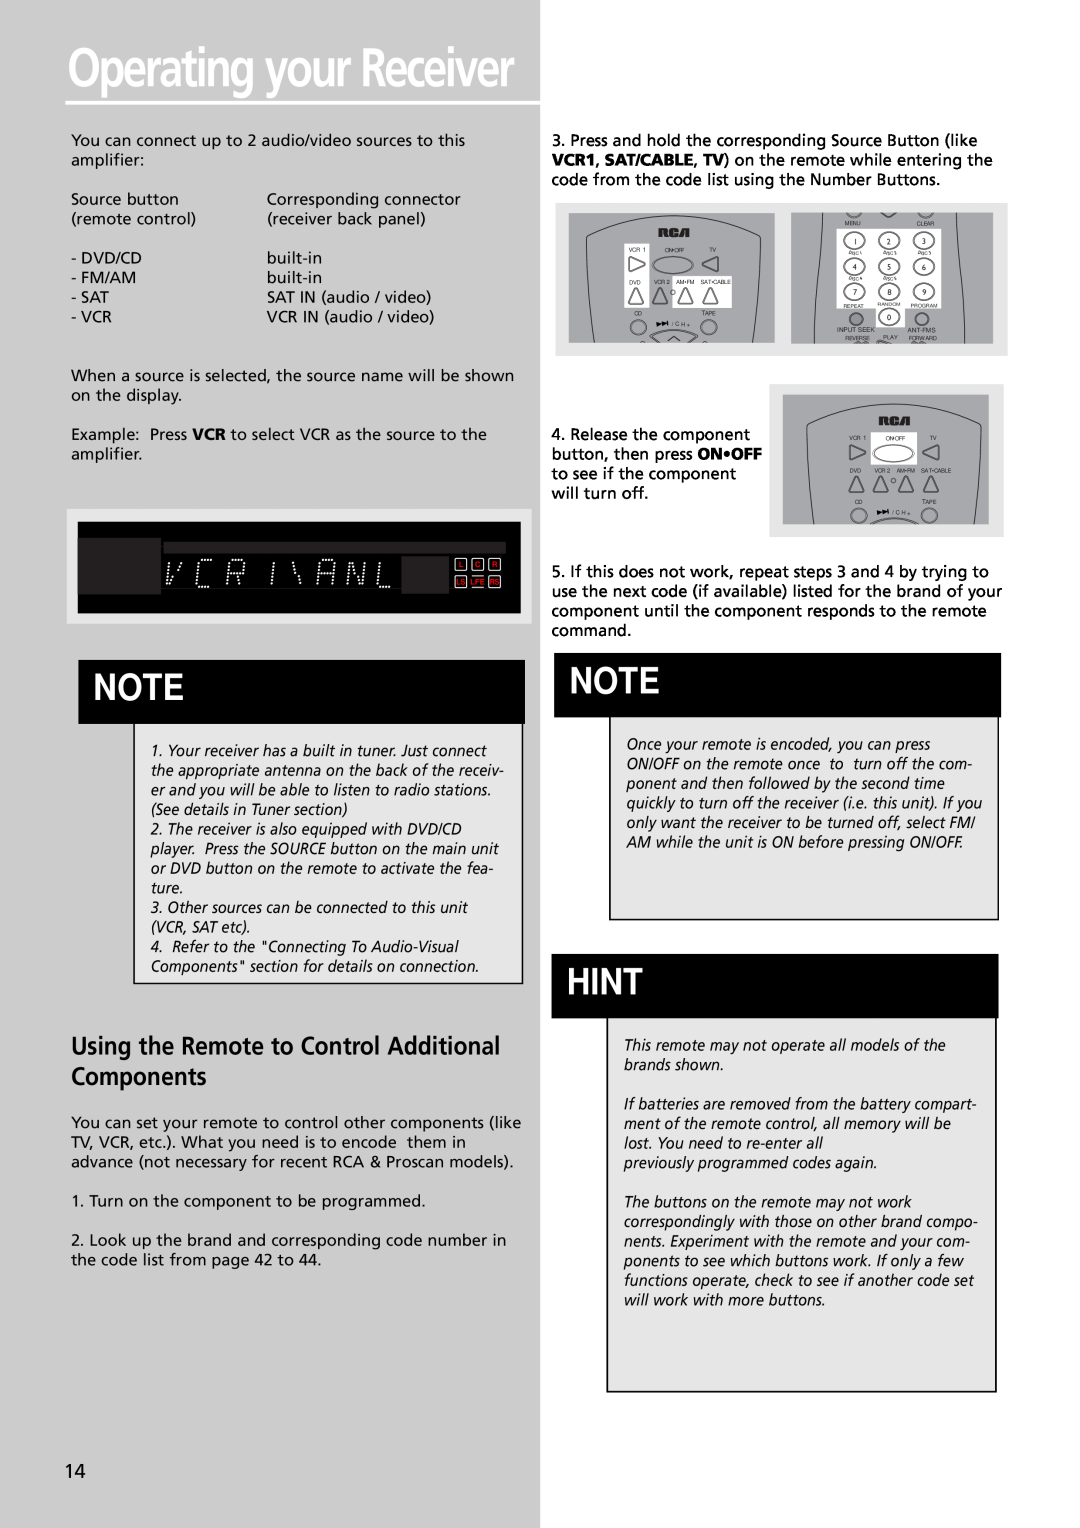 RCA RTDVD1 user manual Operating your Receiver, Using the Remote to Control Additional Components, Hint 